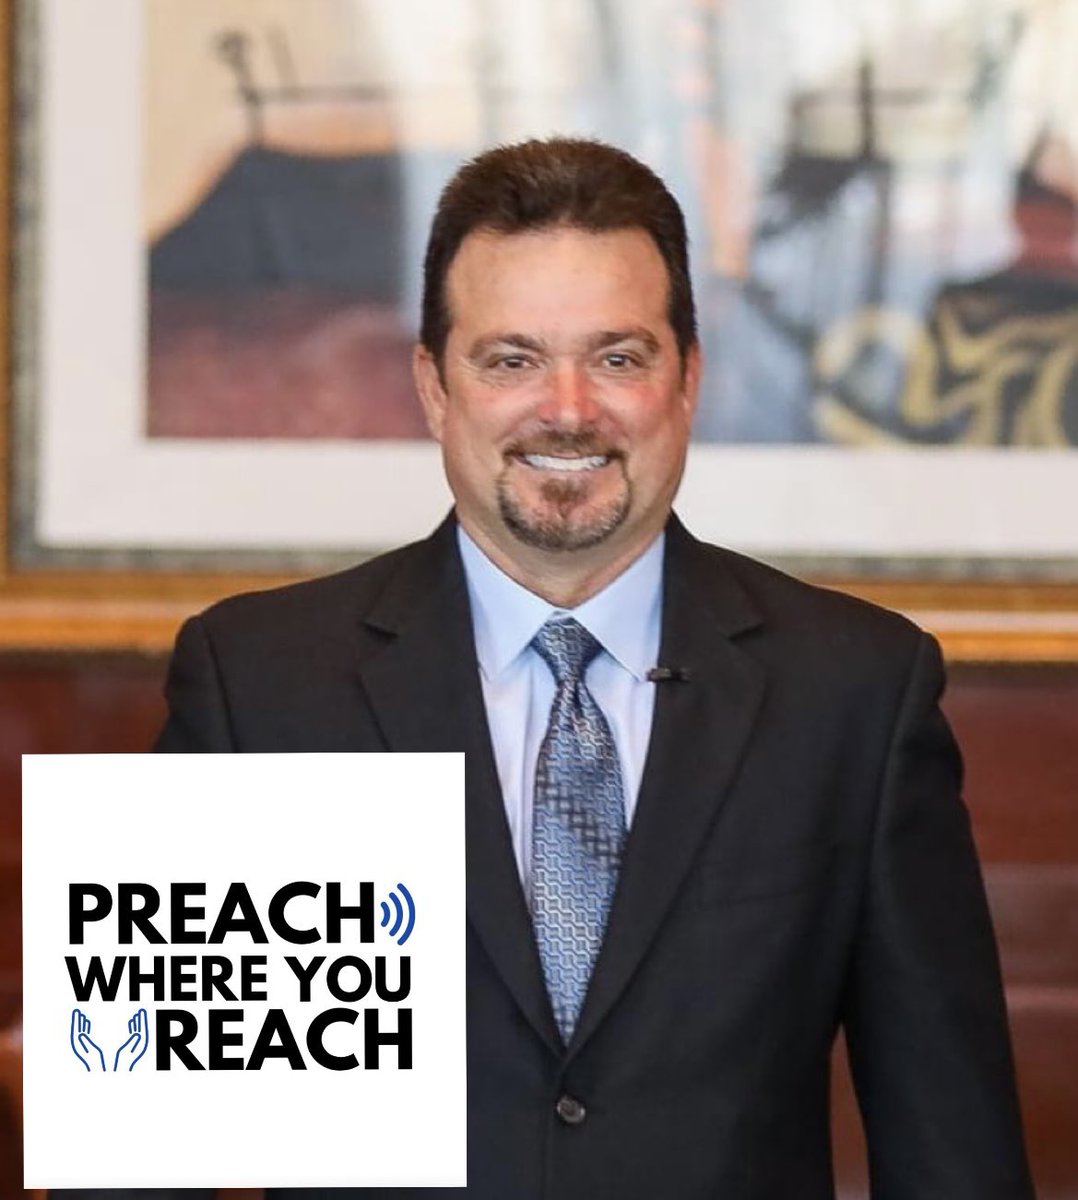 New “Preach Where You Reach Podcast” episode out now! Sean LaGasse, an entrepreneur & pastor, shares how the Miami Dolphins helped change  his faith trajectory, and his entrepreneurial and faith journey. 
 #Faith #podcast #entrepreneur #PWYR https://t.co/RKnfYSzEUi